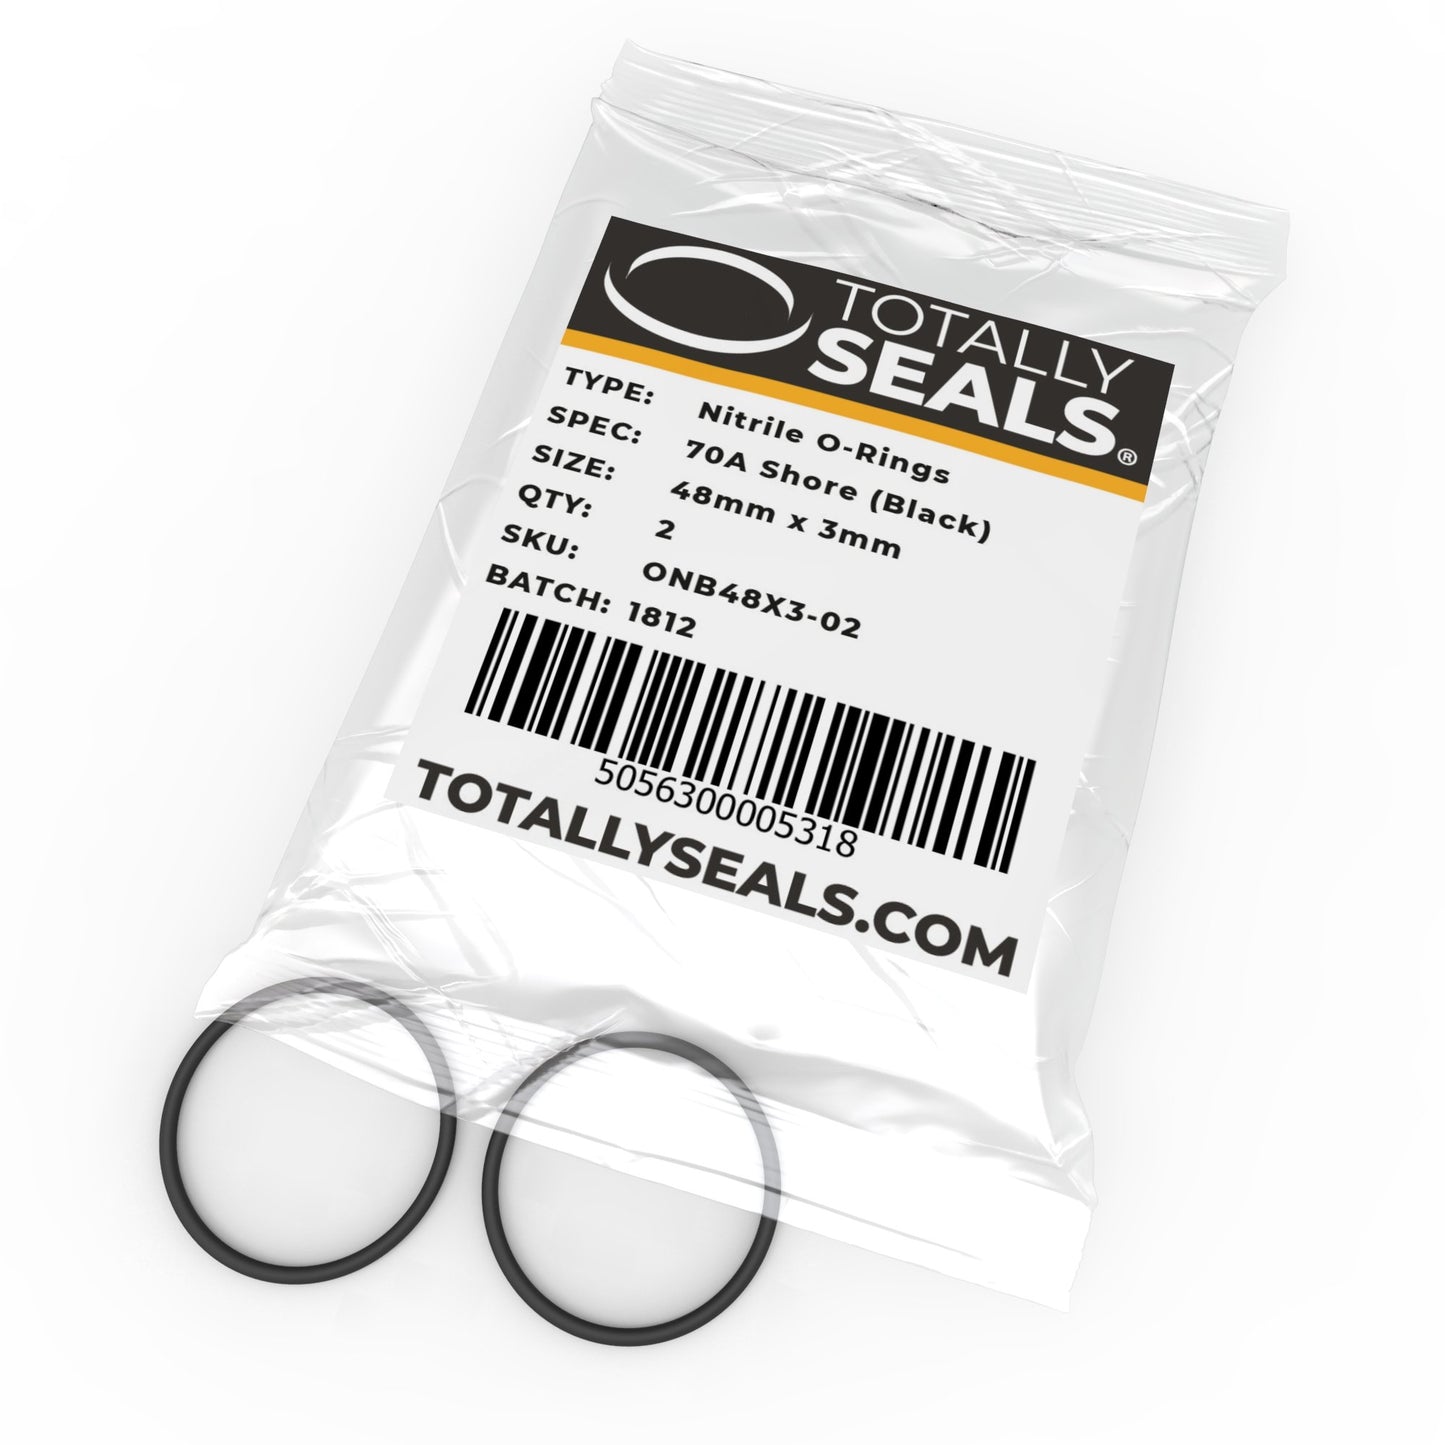 48mm x 3mm (54mm OD) Nitrile O-Rings - Totally Seals®